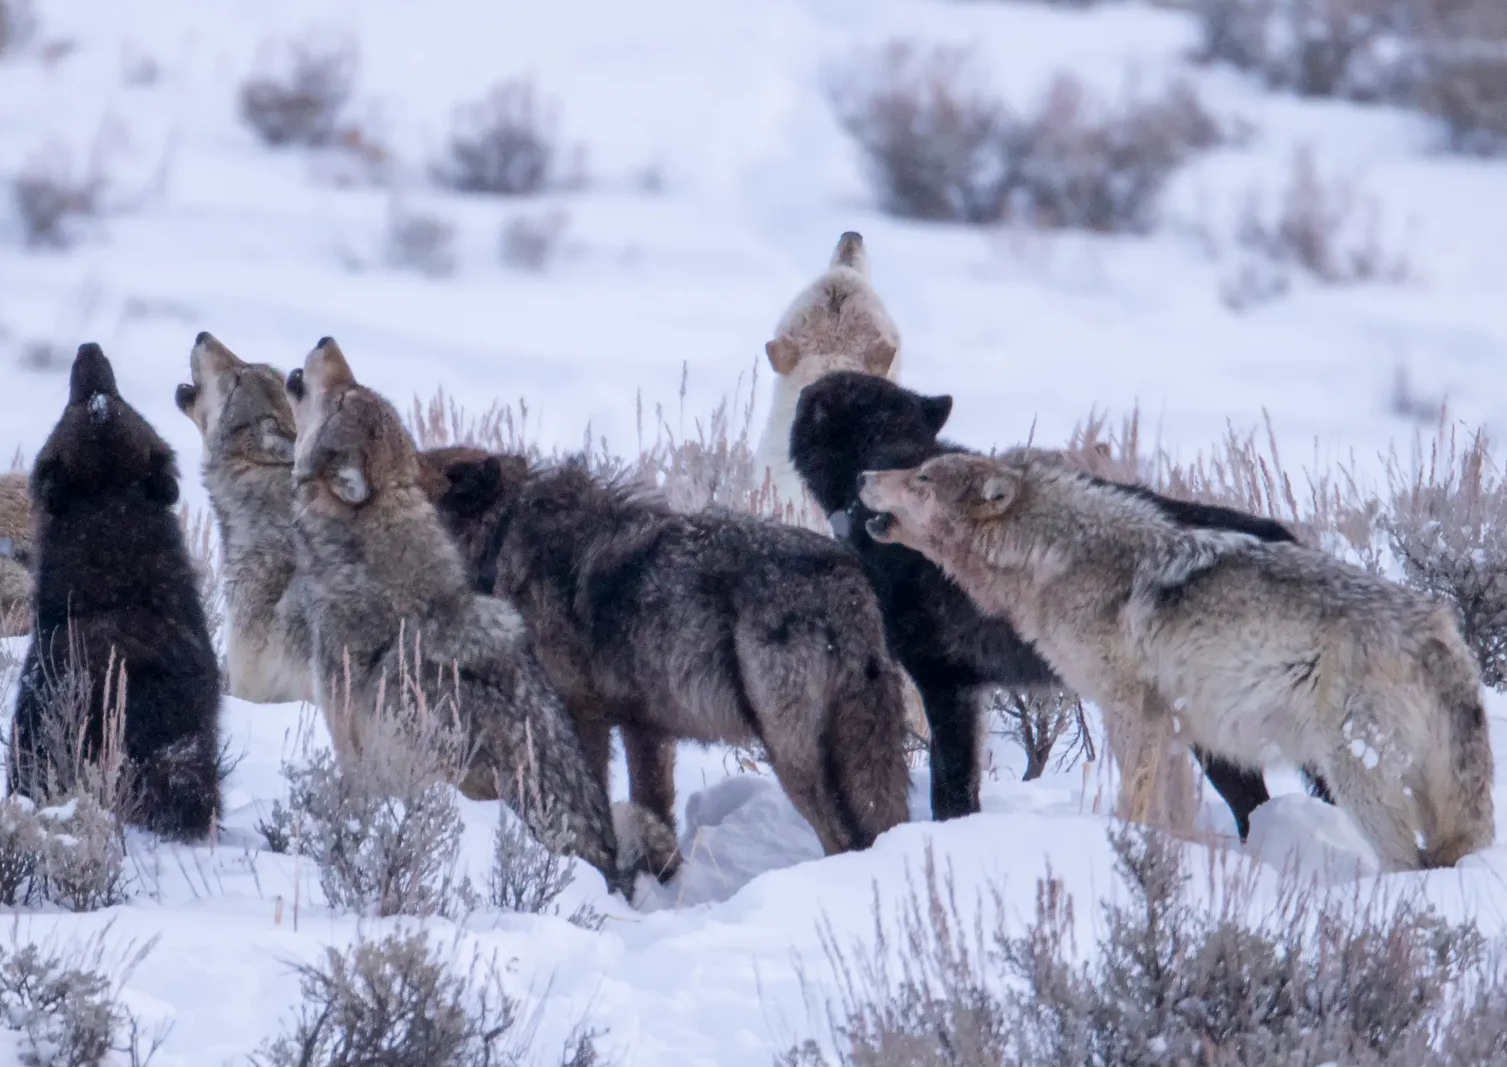 As Wolf Management Debate Reaches a Fever Pitch, the Interior Department Hires a National Mediator